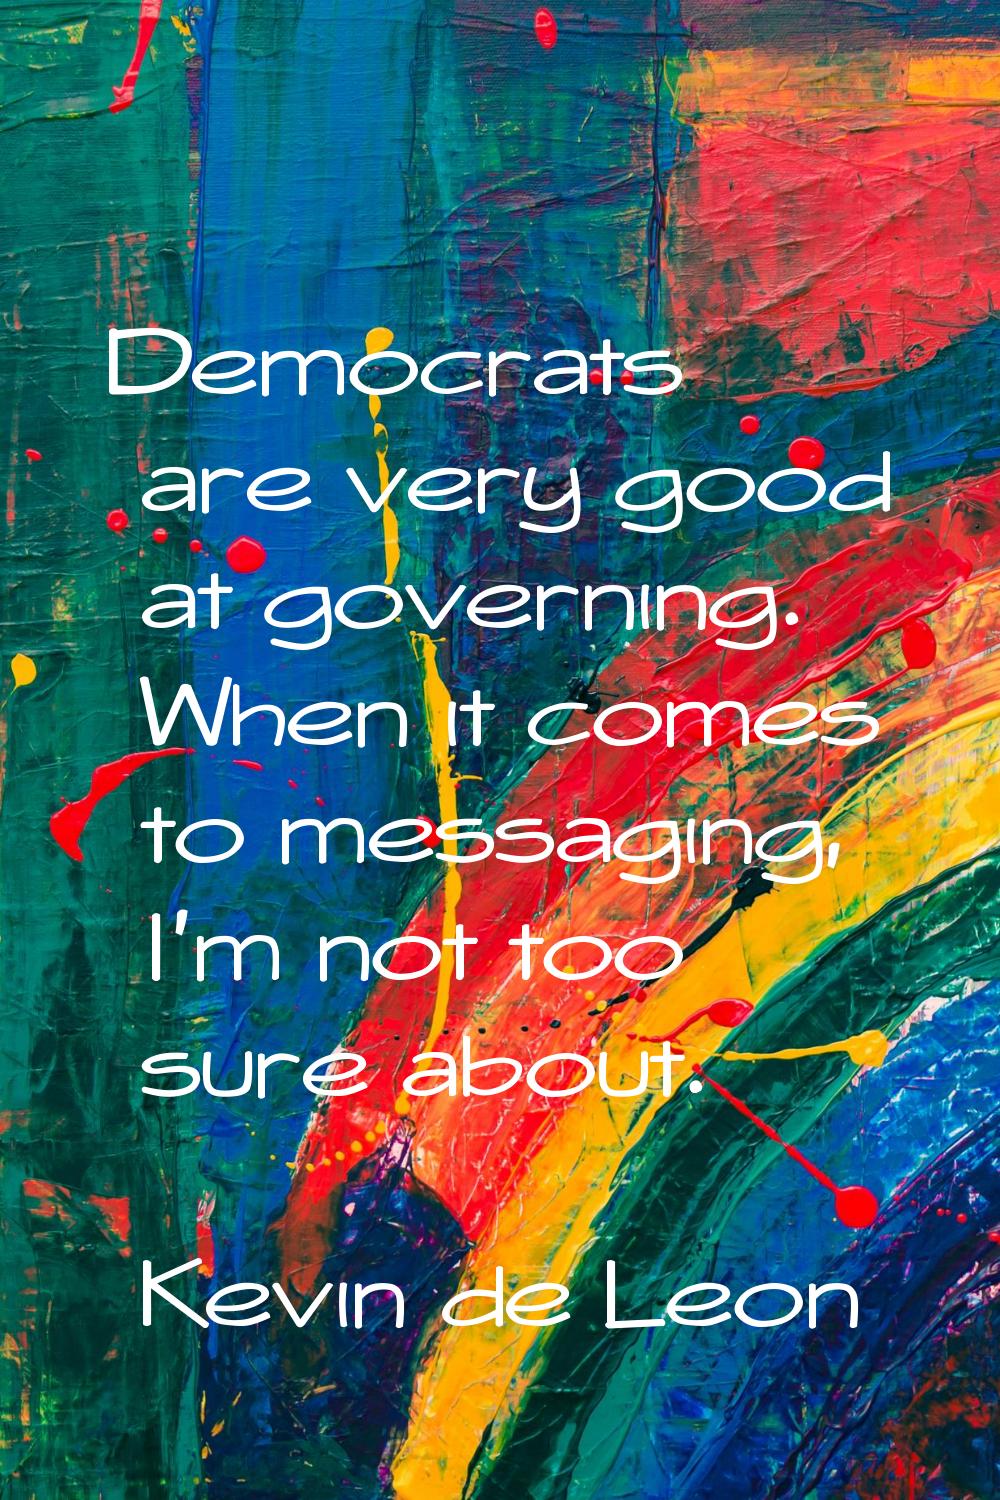 Democrats are very good at governing. When it comes to messaging, I'm not too sure about.